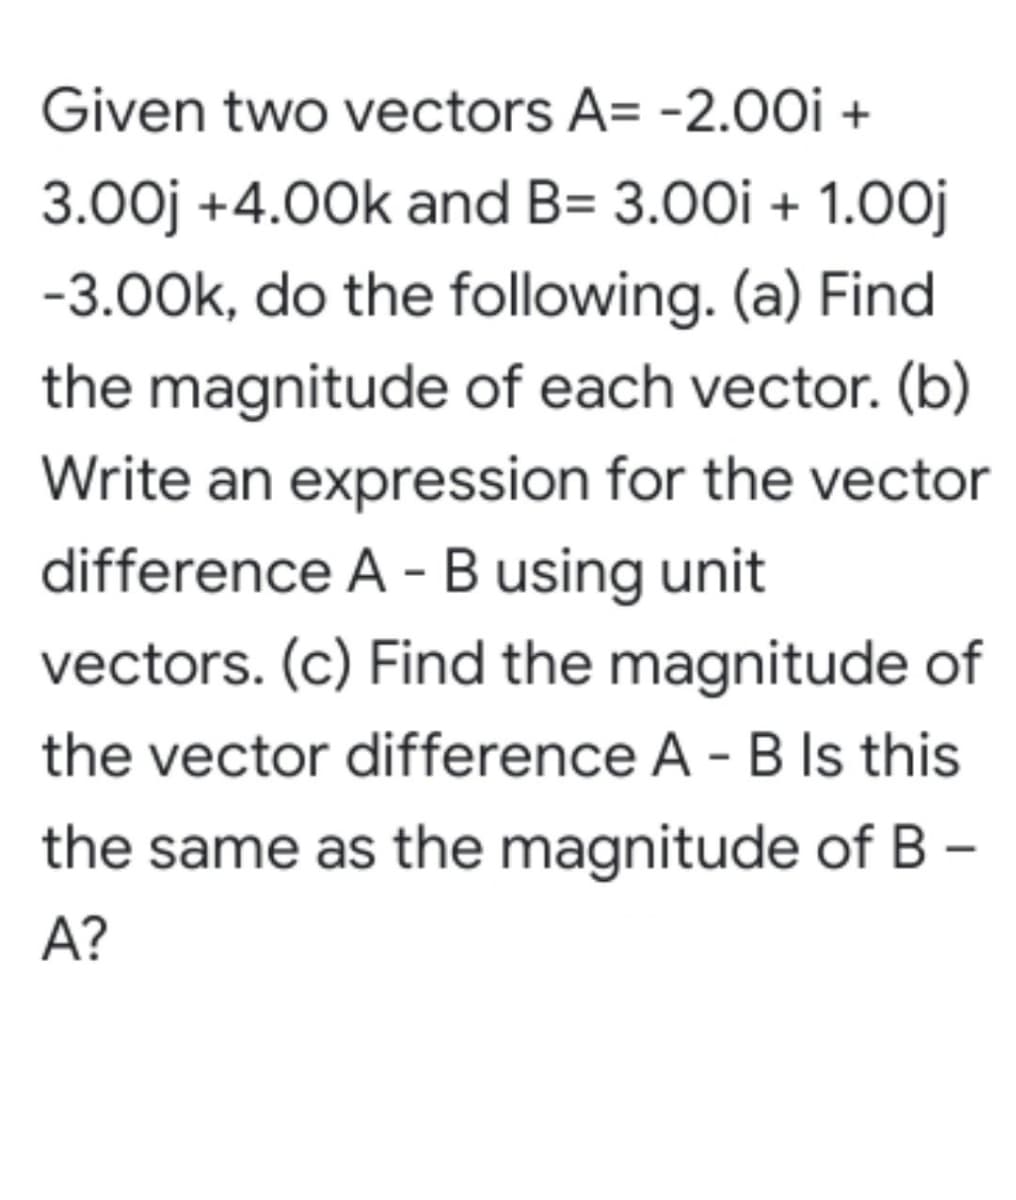 Given two vectors A= -2.00i +
3.00j +4.00k and B= 3.00i + 1.0oj
-3.00k, do the following. (a) Find
the magnitude of each vector. (b)
Write an expression for the vector
difference A - B using unit
vectors. (c) Find the magnitude of
the vector difference A - B Is this
the same as the magnitude of B -
A?
